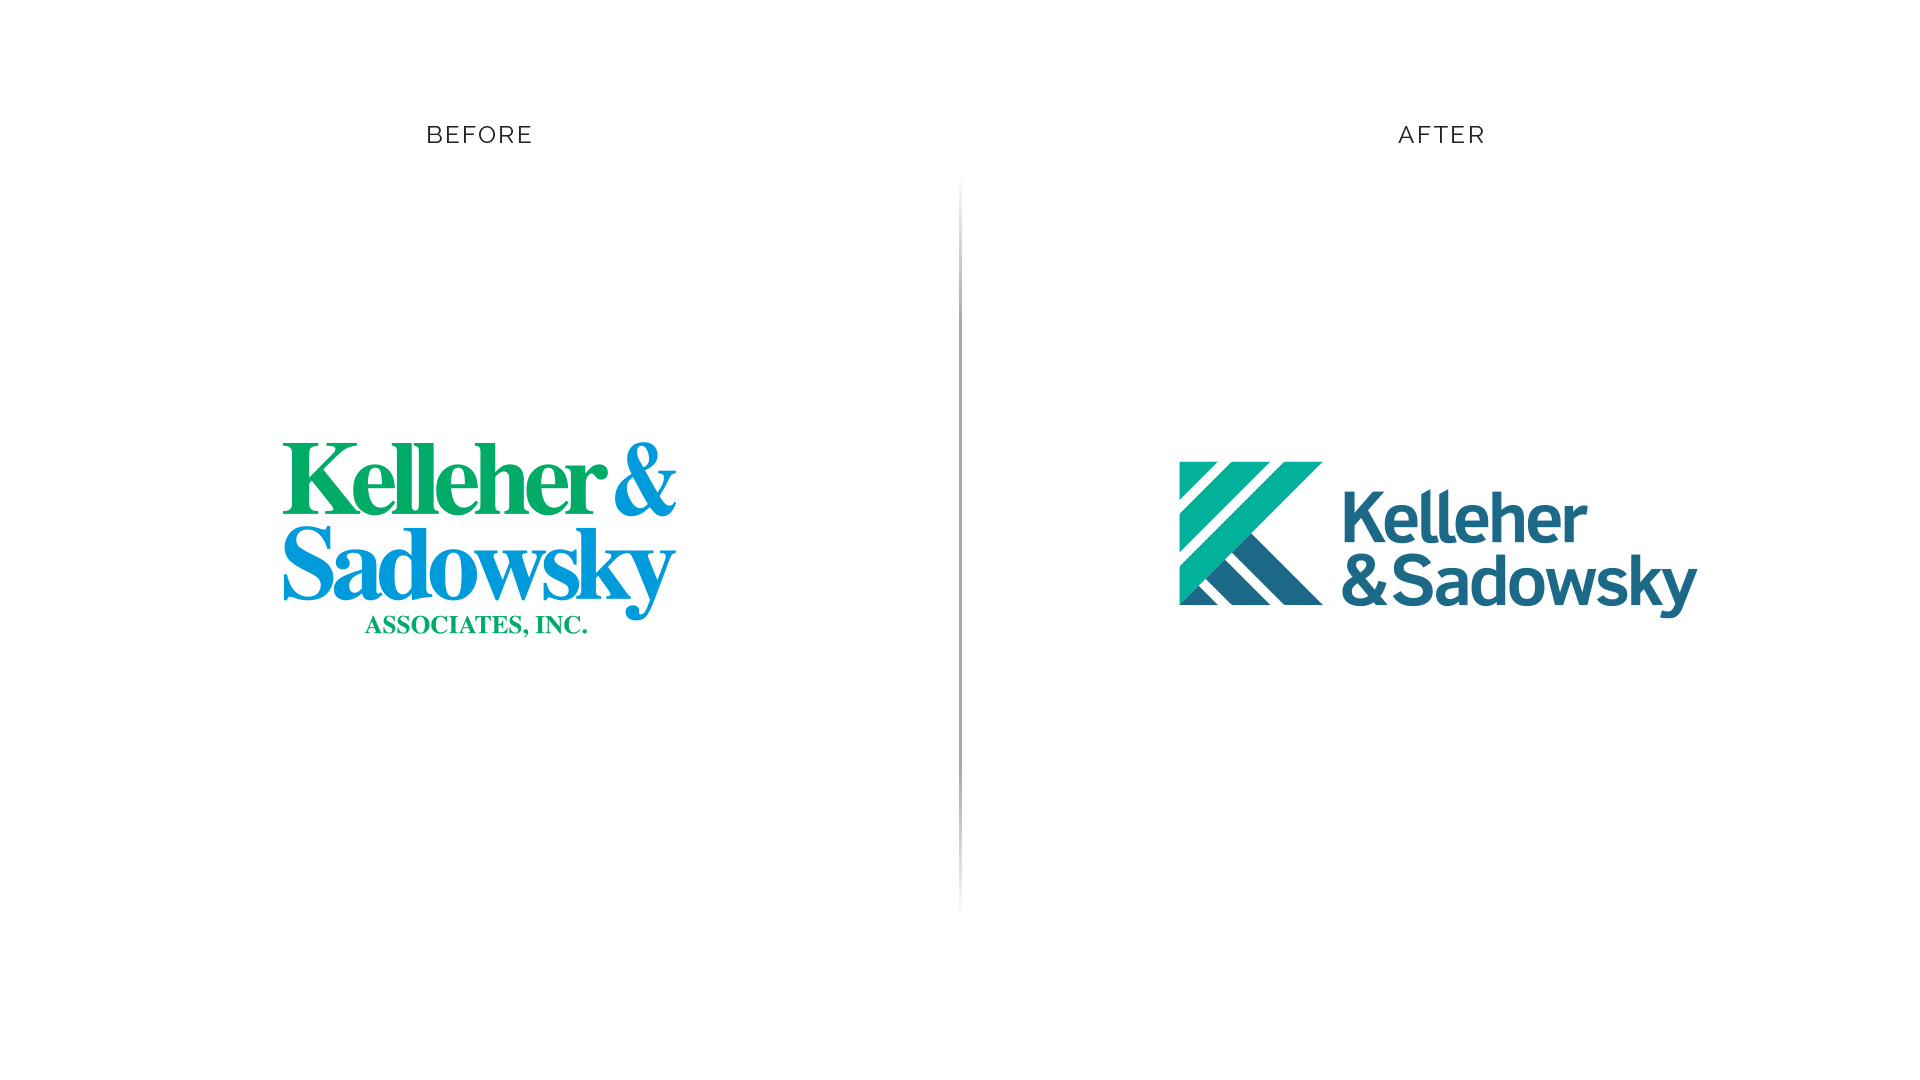 Before-After_logos-3-1.jpg